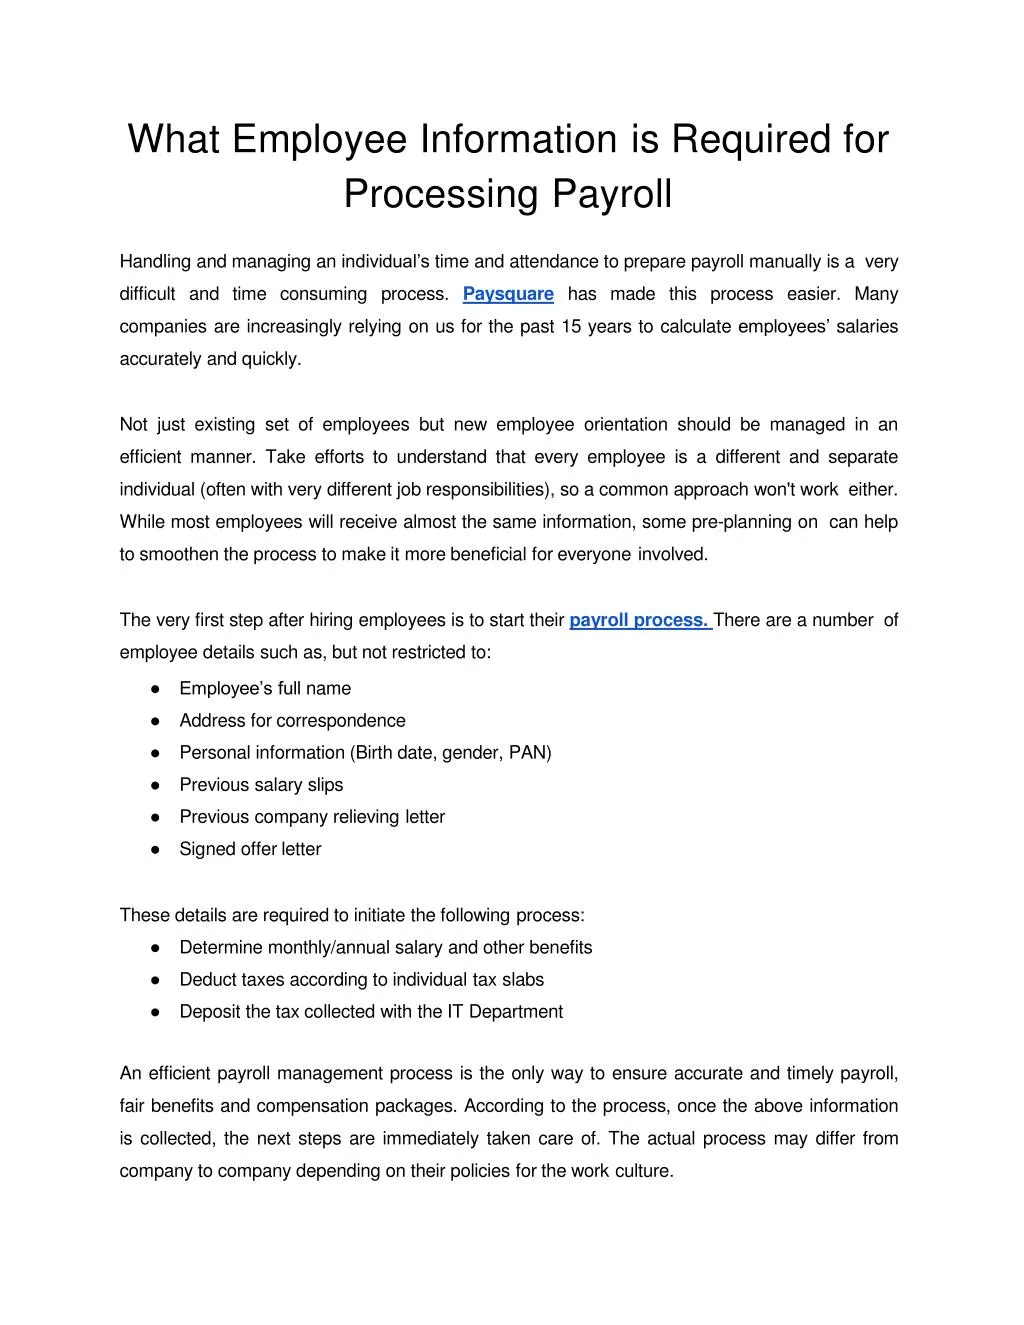 what employee information is required for processing payroll